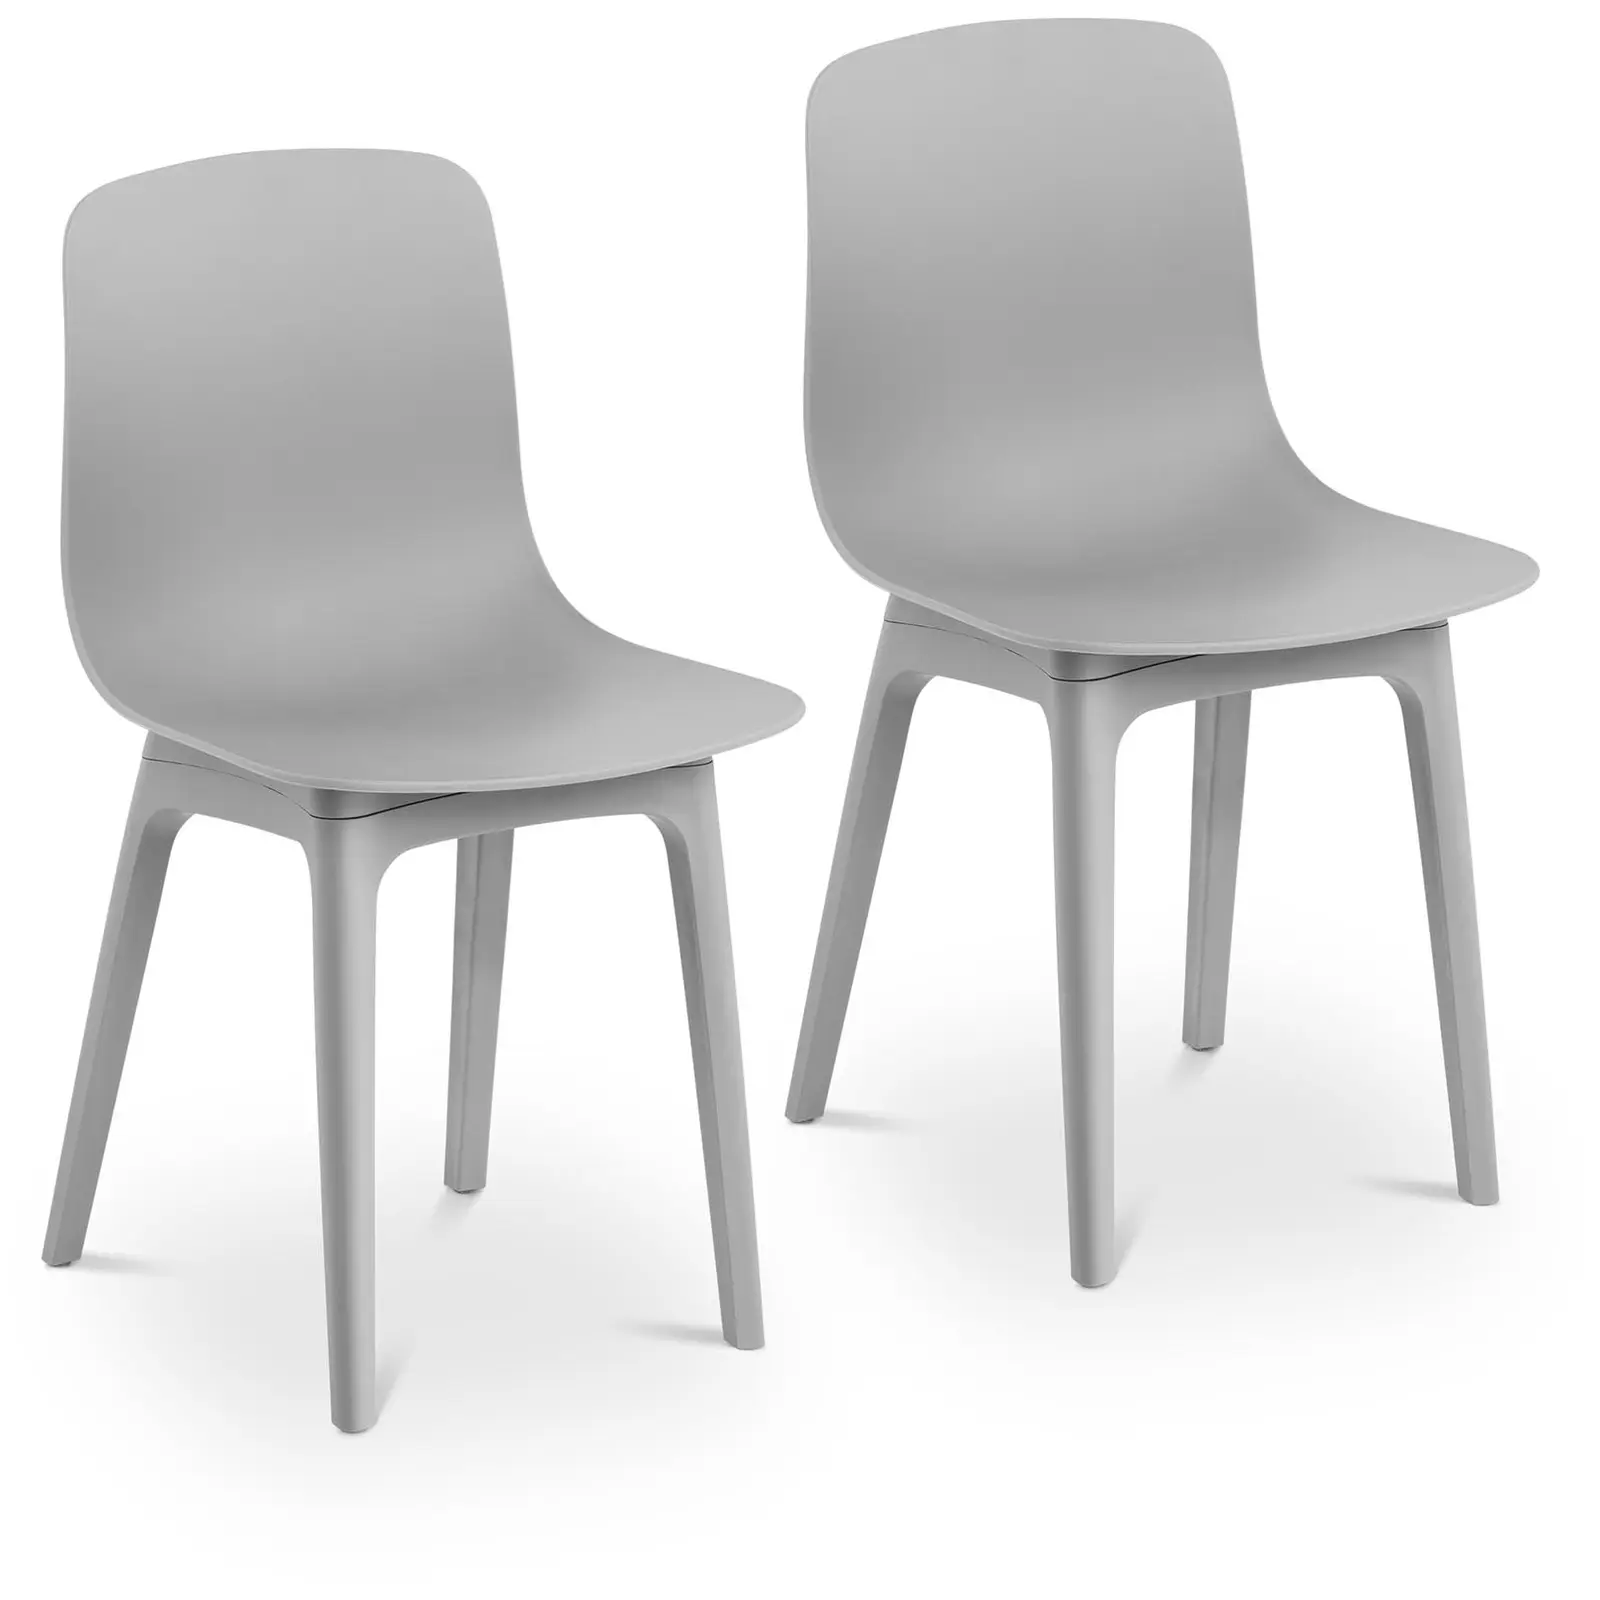 Factory second Chair - set of 2 - up to 150 kg - seat 44 x 41 cm - grey